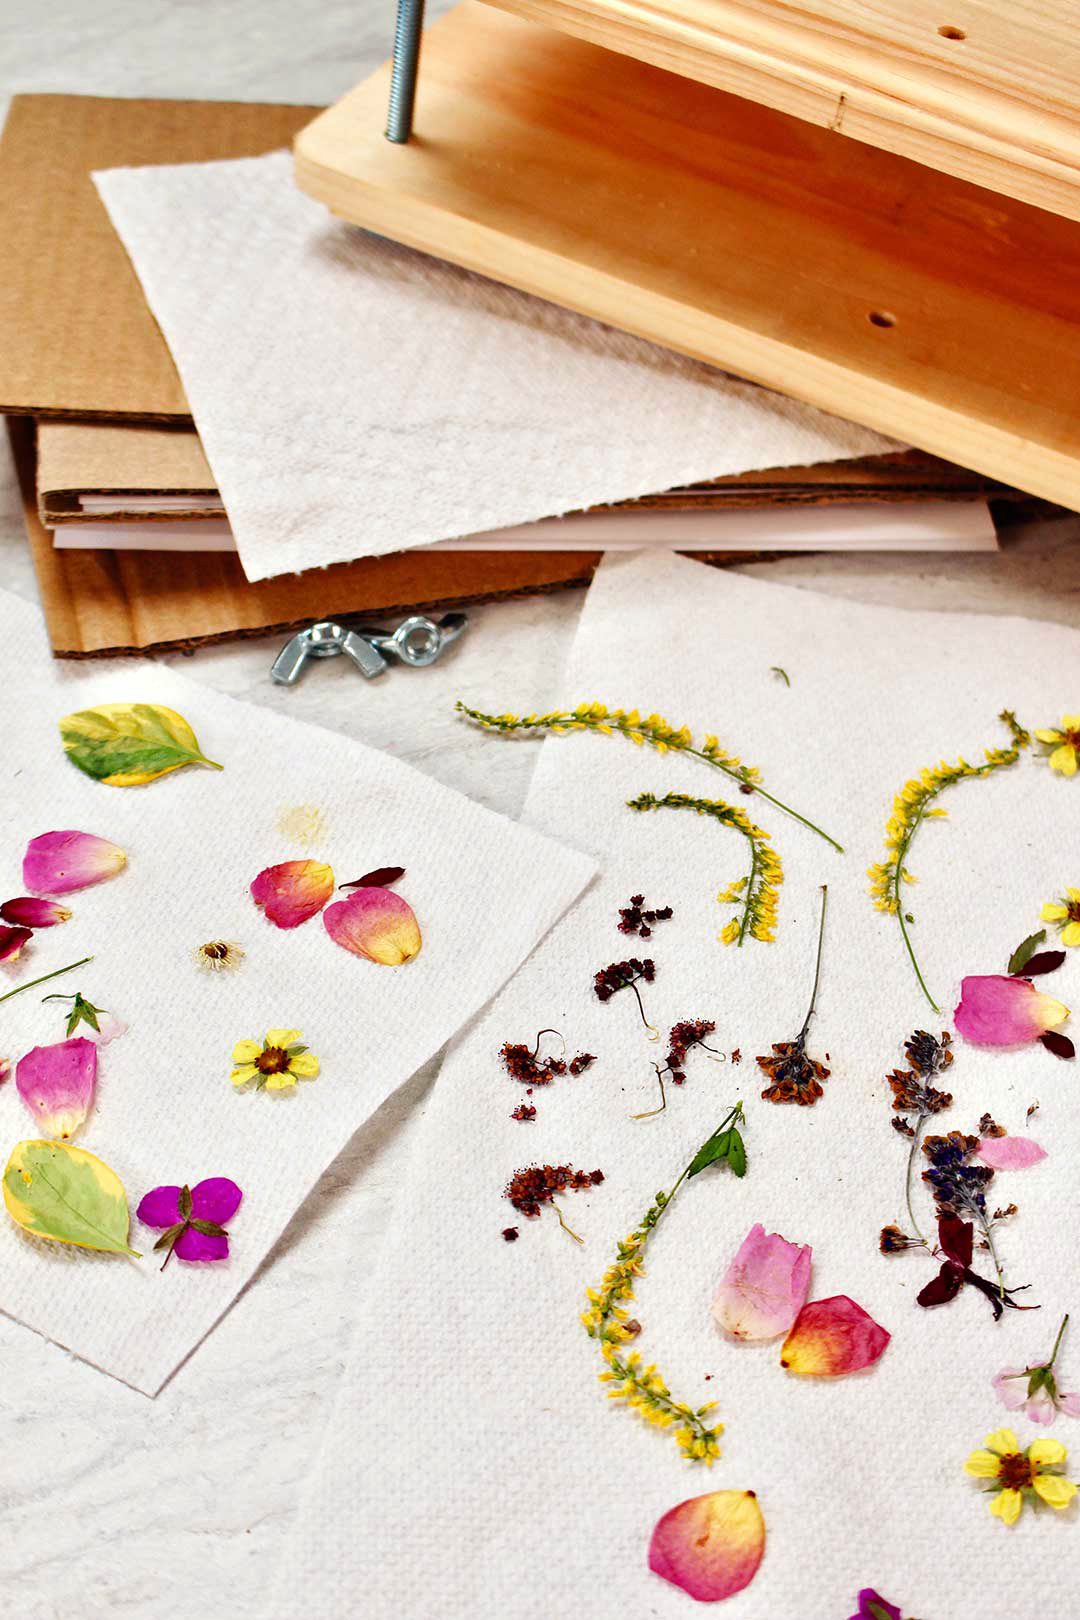 Pressed flowers rest on paper towels to dry.